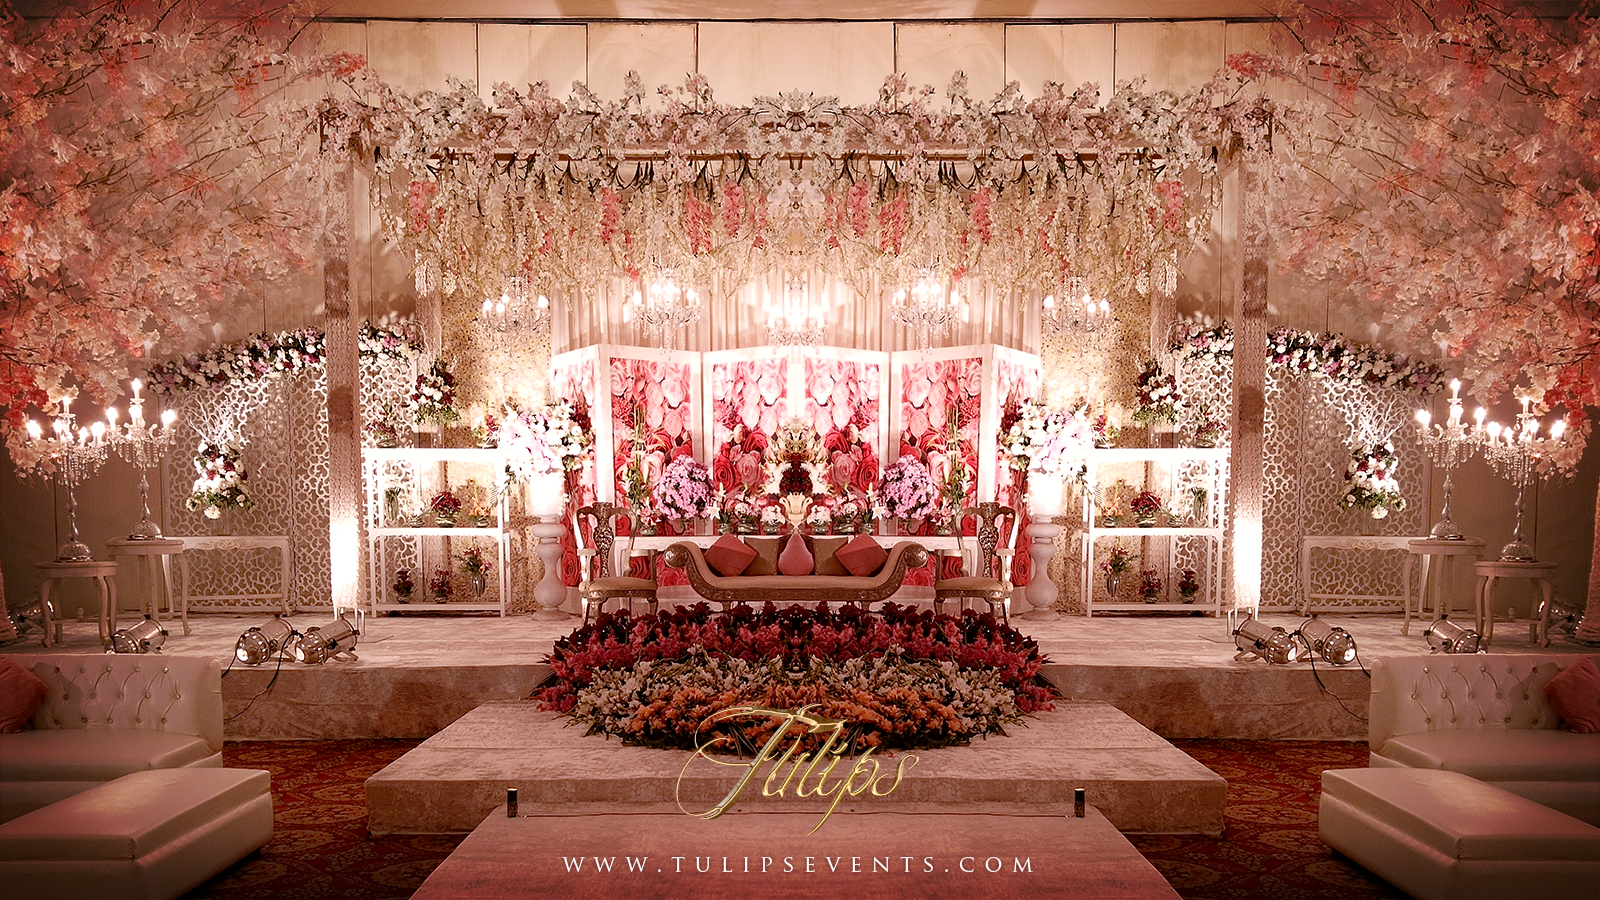 Top Wedding Stages of 2016 by Tulips Events Management in Pakistan